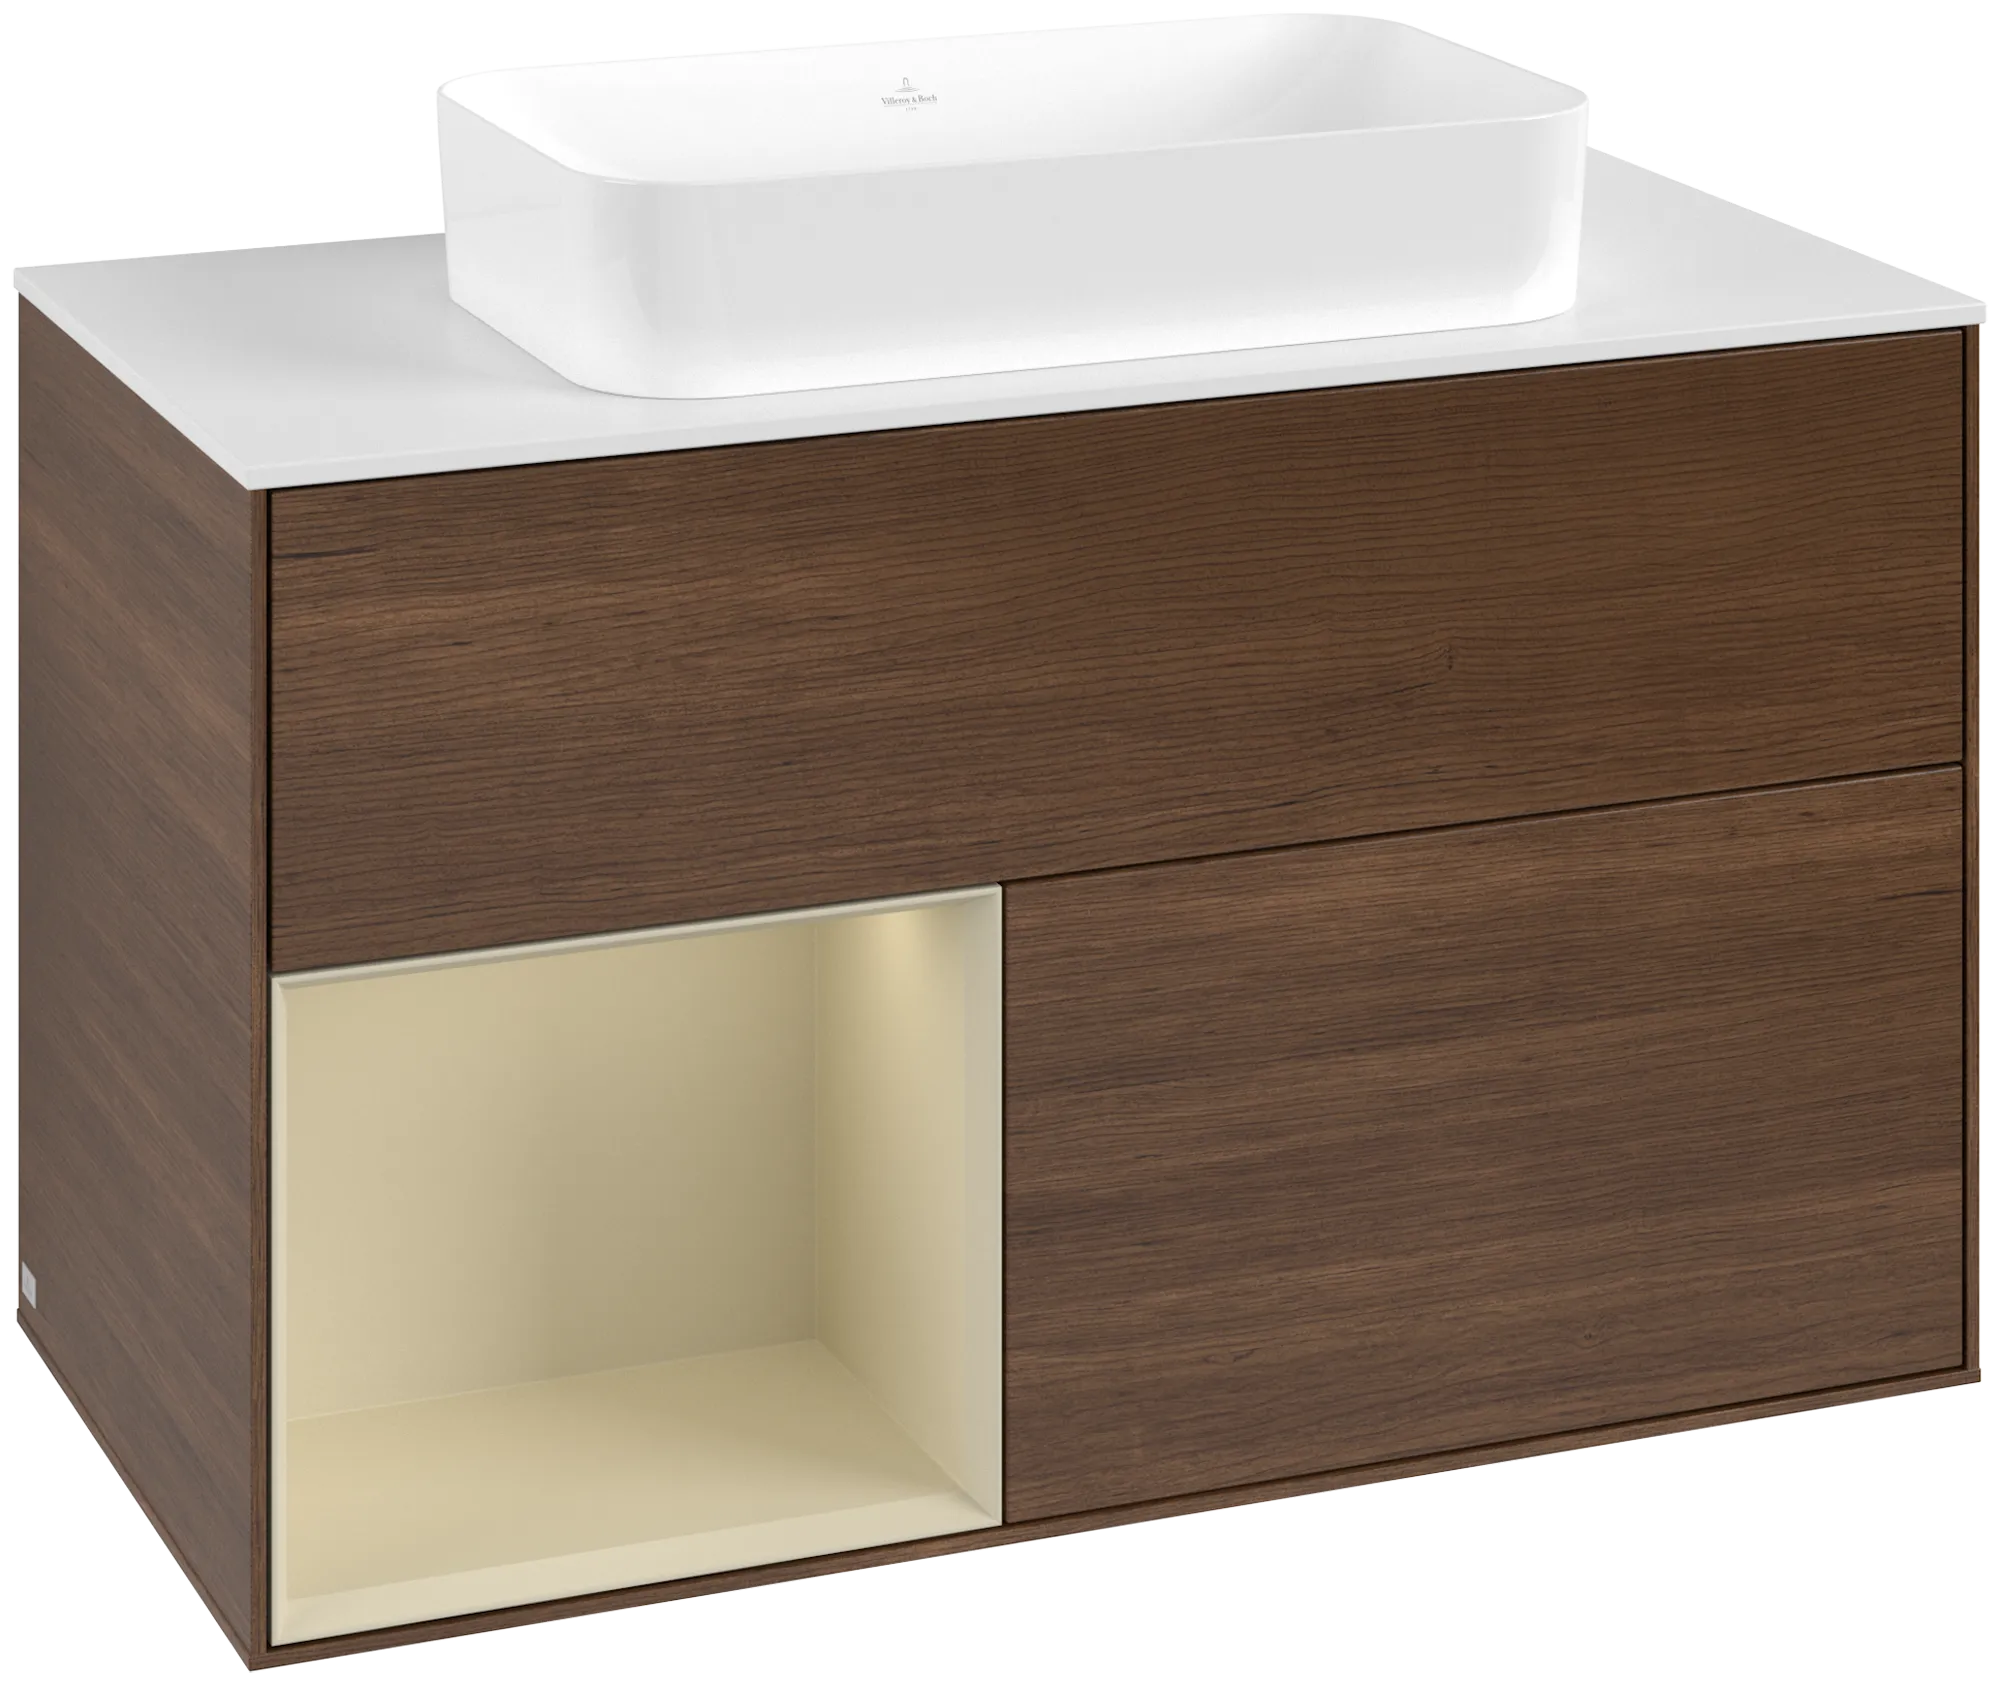 Picture of VILLEROY BOCH Finion Vanity unit, with lighting, 2 pull-out compartments, 1000 x 603 x 501 mm, Walnut Veneer / Silk Grey Matt Lacquer / Glass White Matt #G651HJGN